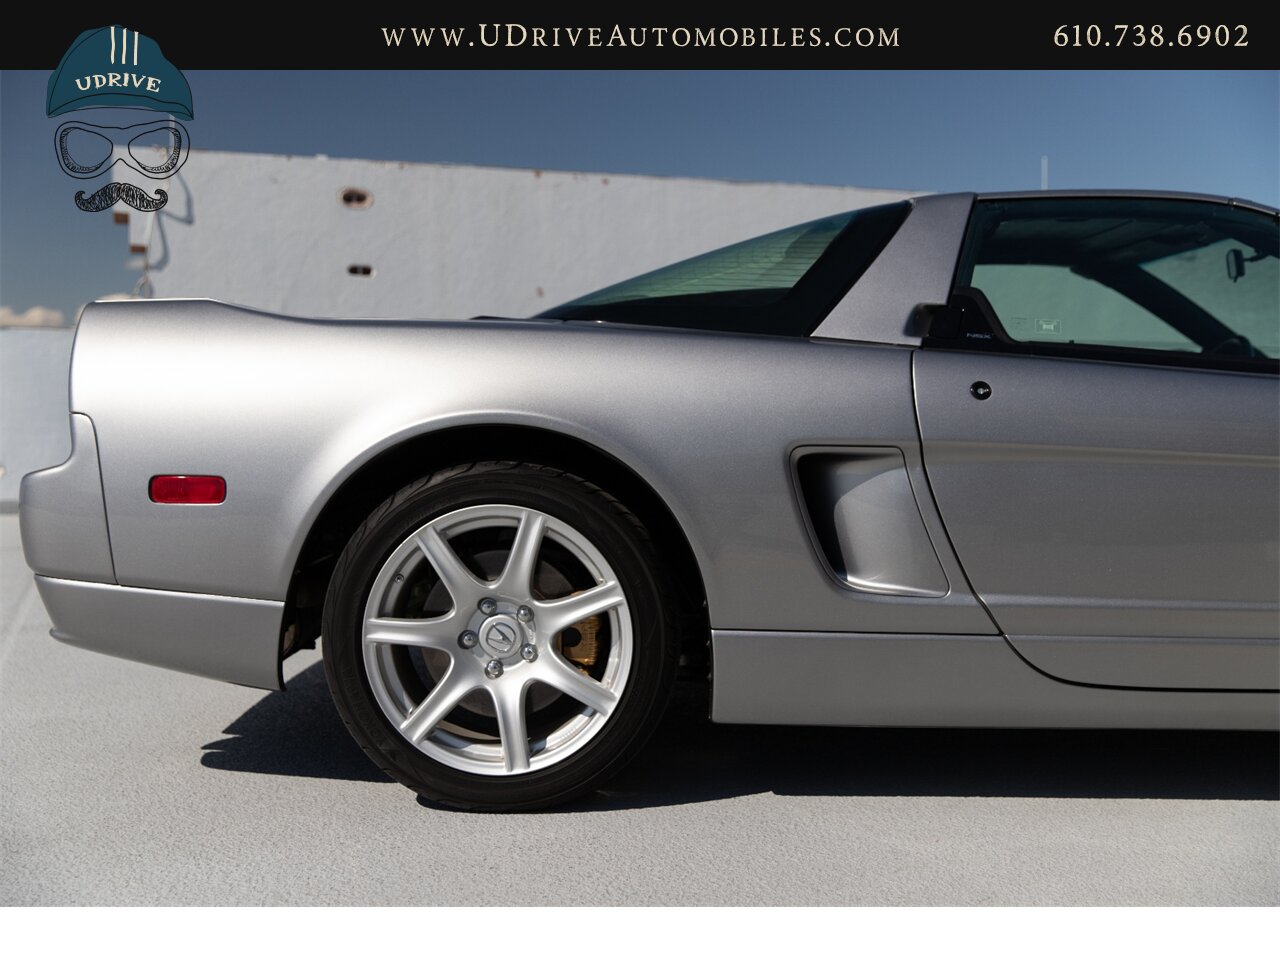 2002 Acura NSX NSX-T 9k Miles 6 Speed Manual Service History  Collector Grade - Photo 18 - West Chester, PA 19382